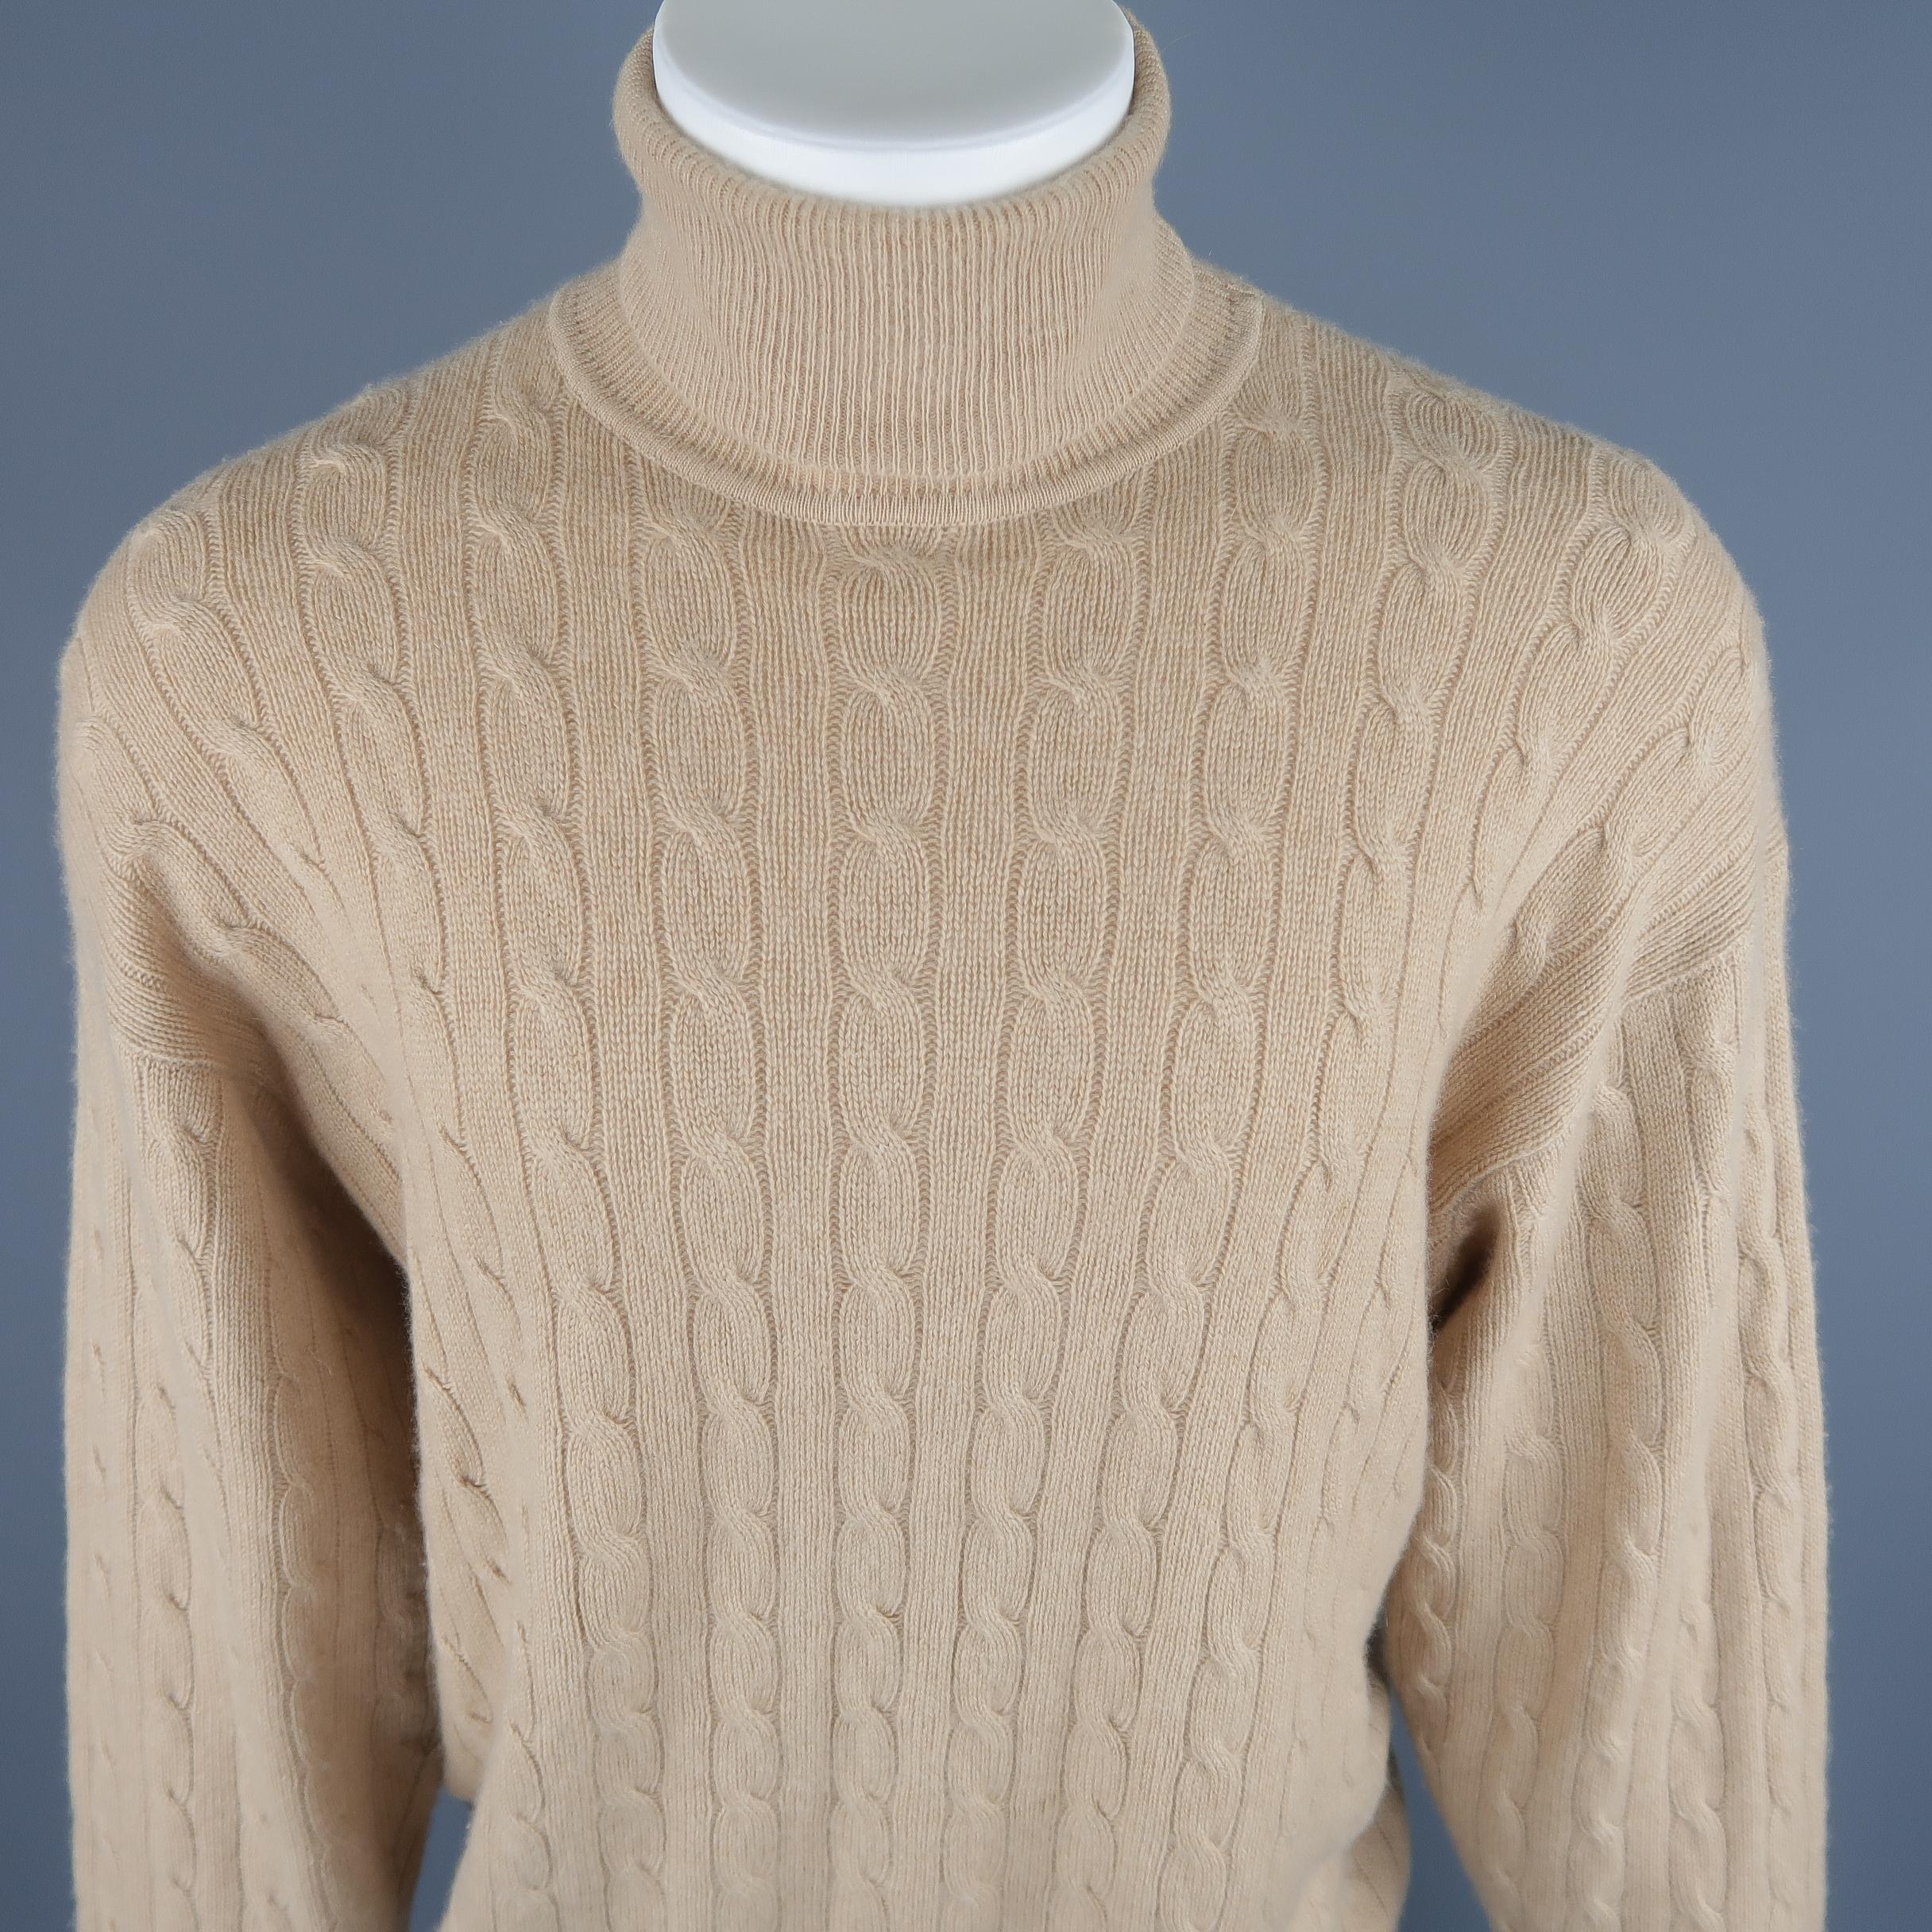 Polo By Ralph Lauren Size XL sweater come in 100% Cashmere in a camel tone cable knit, with a turtleneck and ribbed cuff and waistband.
 
Good Pre-Owned Condition.
Marked: XL
 
Measurements:
 
Shoulder: 20 in.
Chest: 26 in.
Sleeve: 29 in.
Length: 30